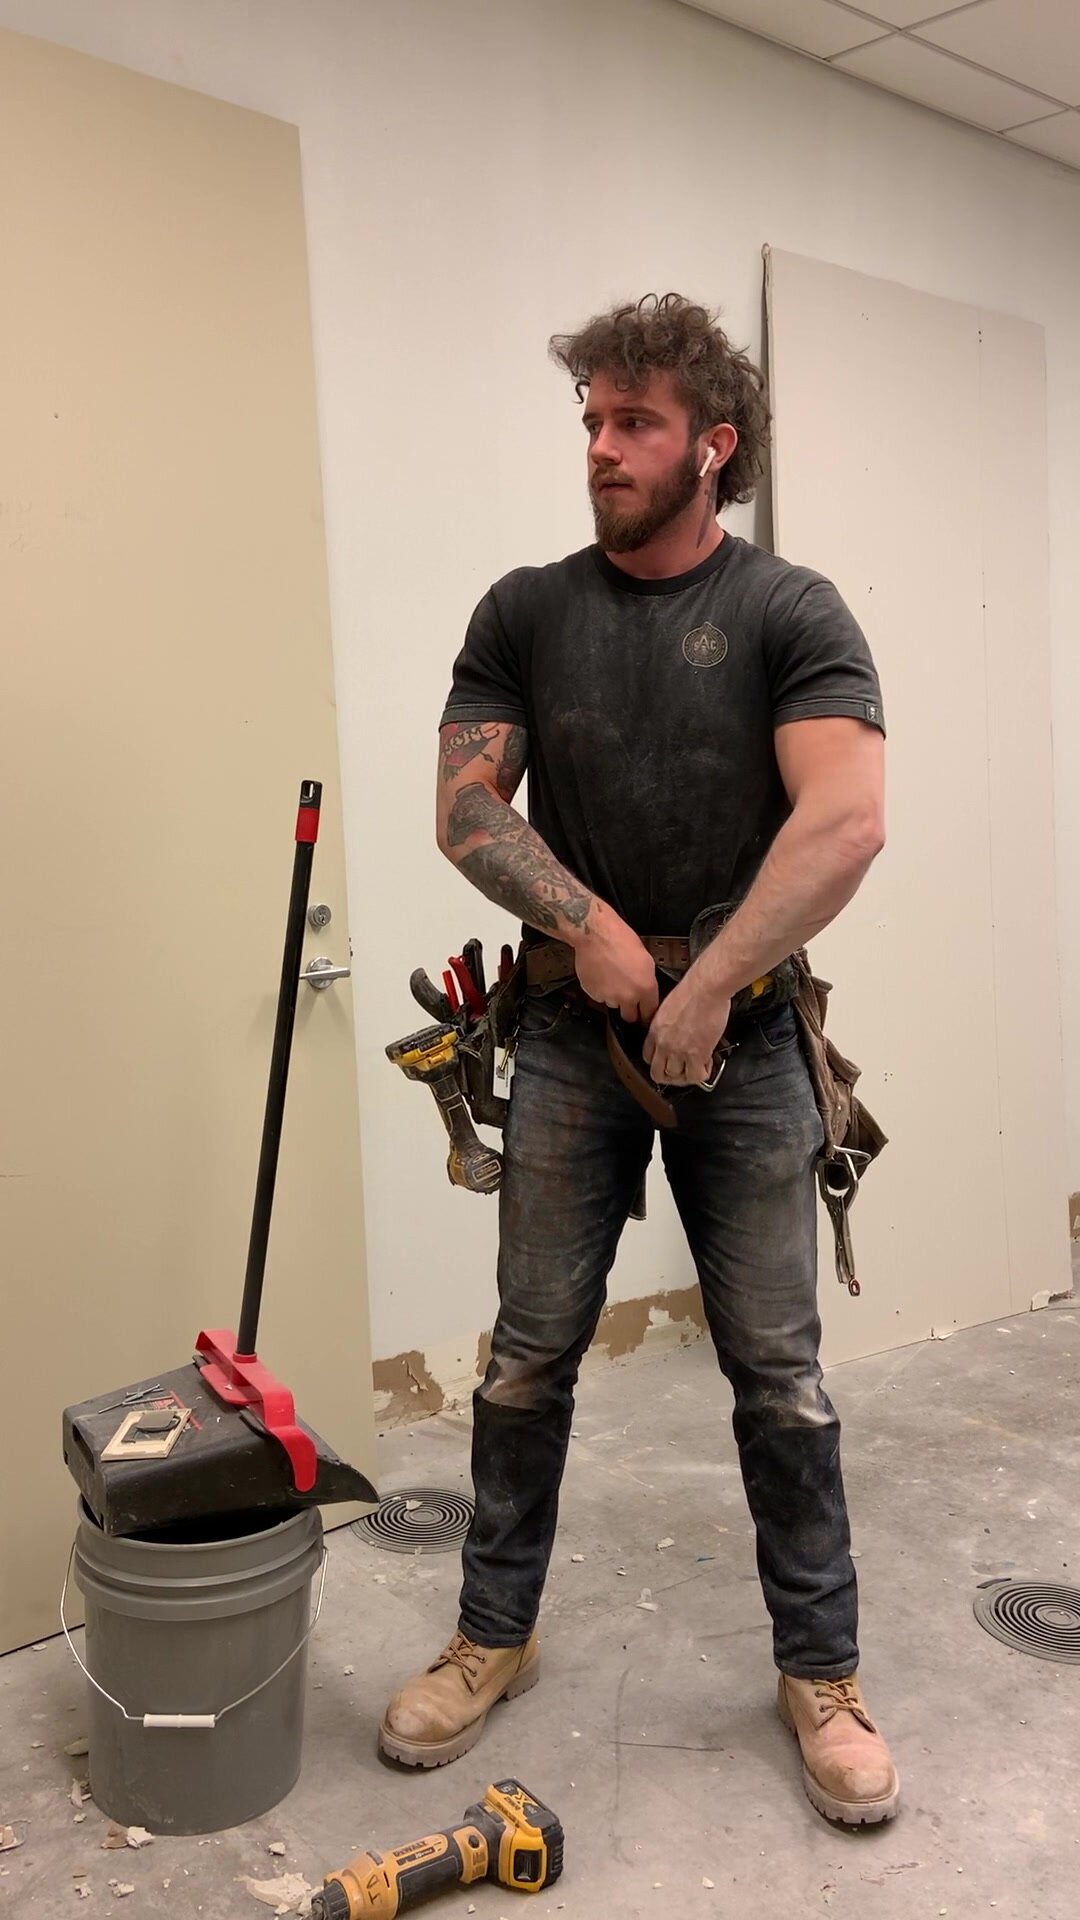 Hunk Construction Worker